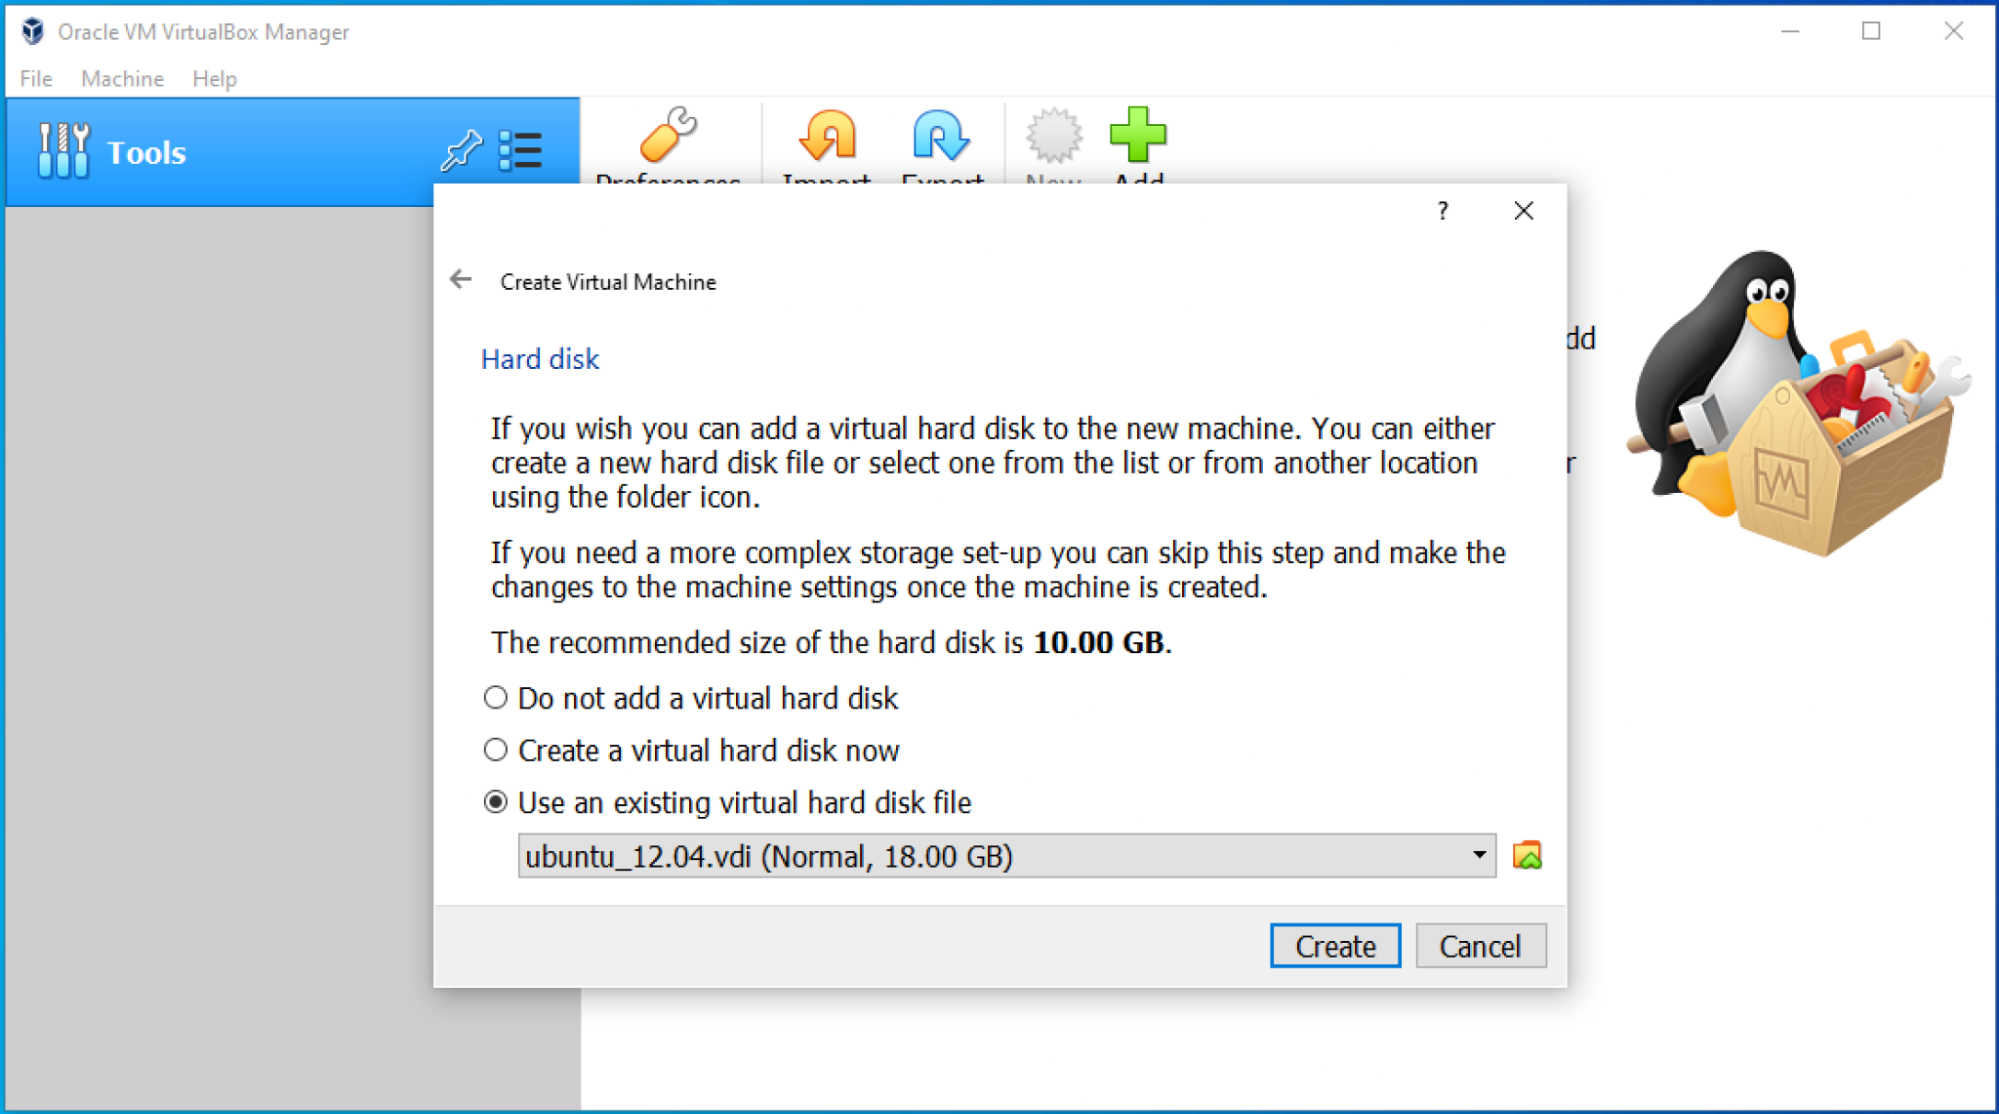 The final step asks you to create once you have selected a hard disk.